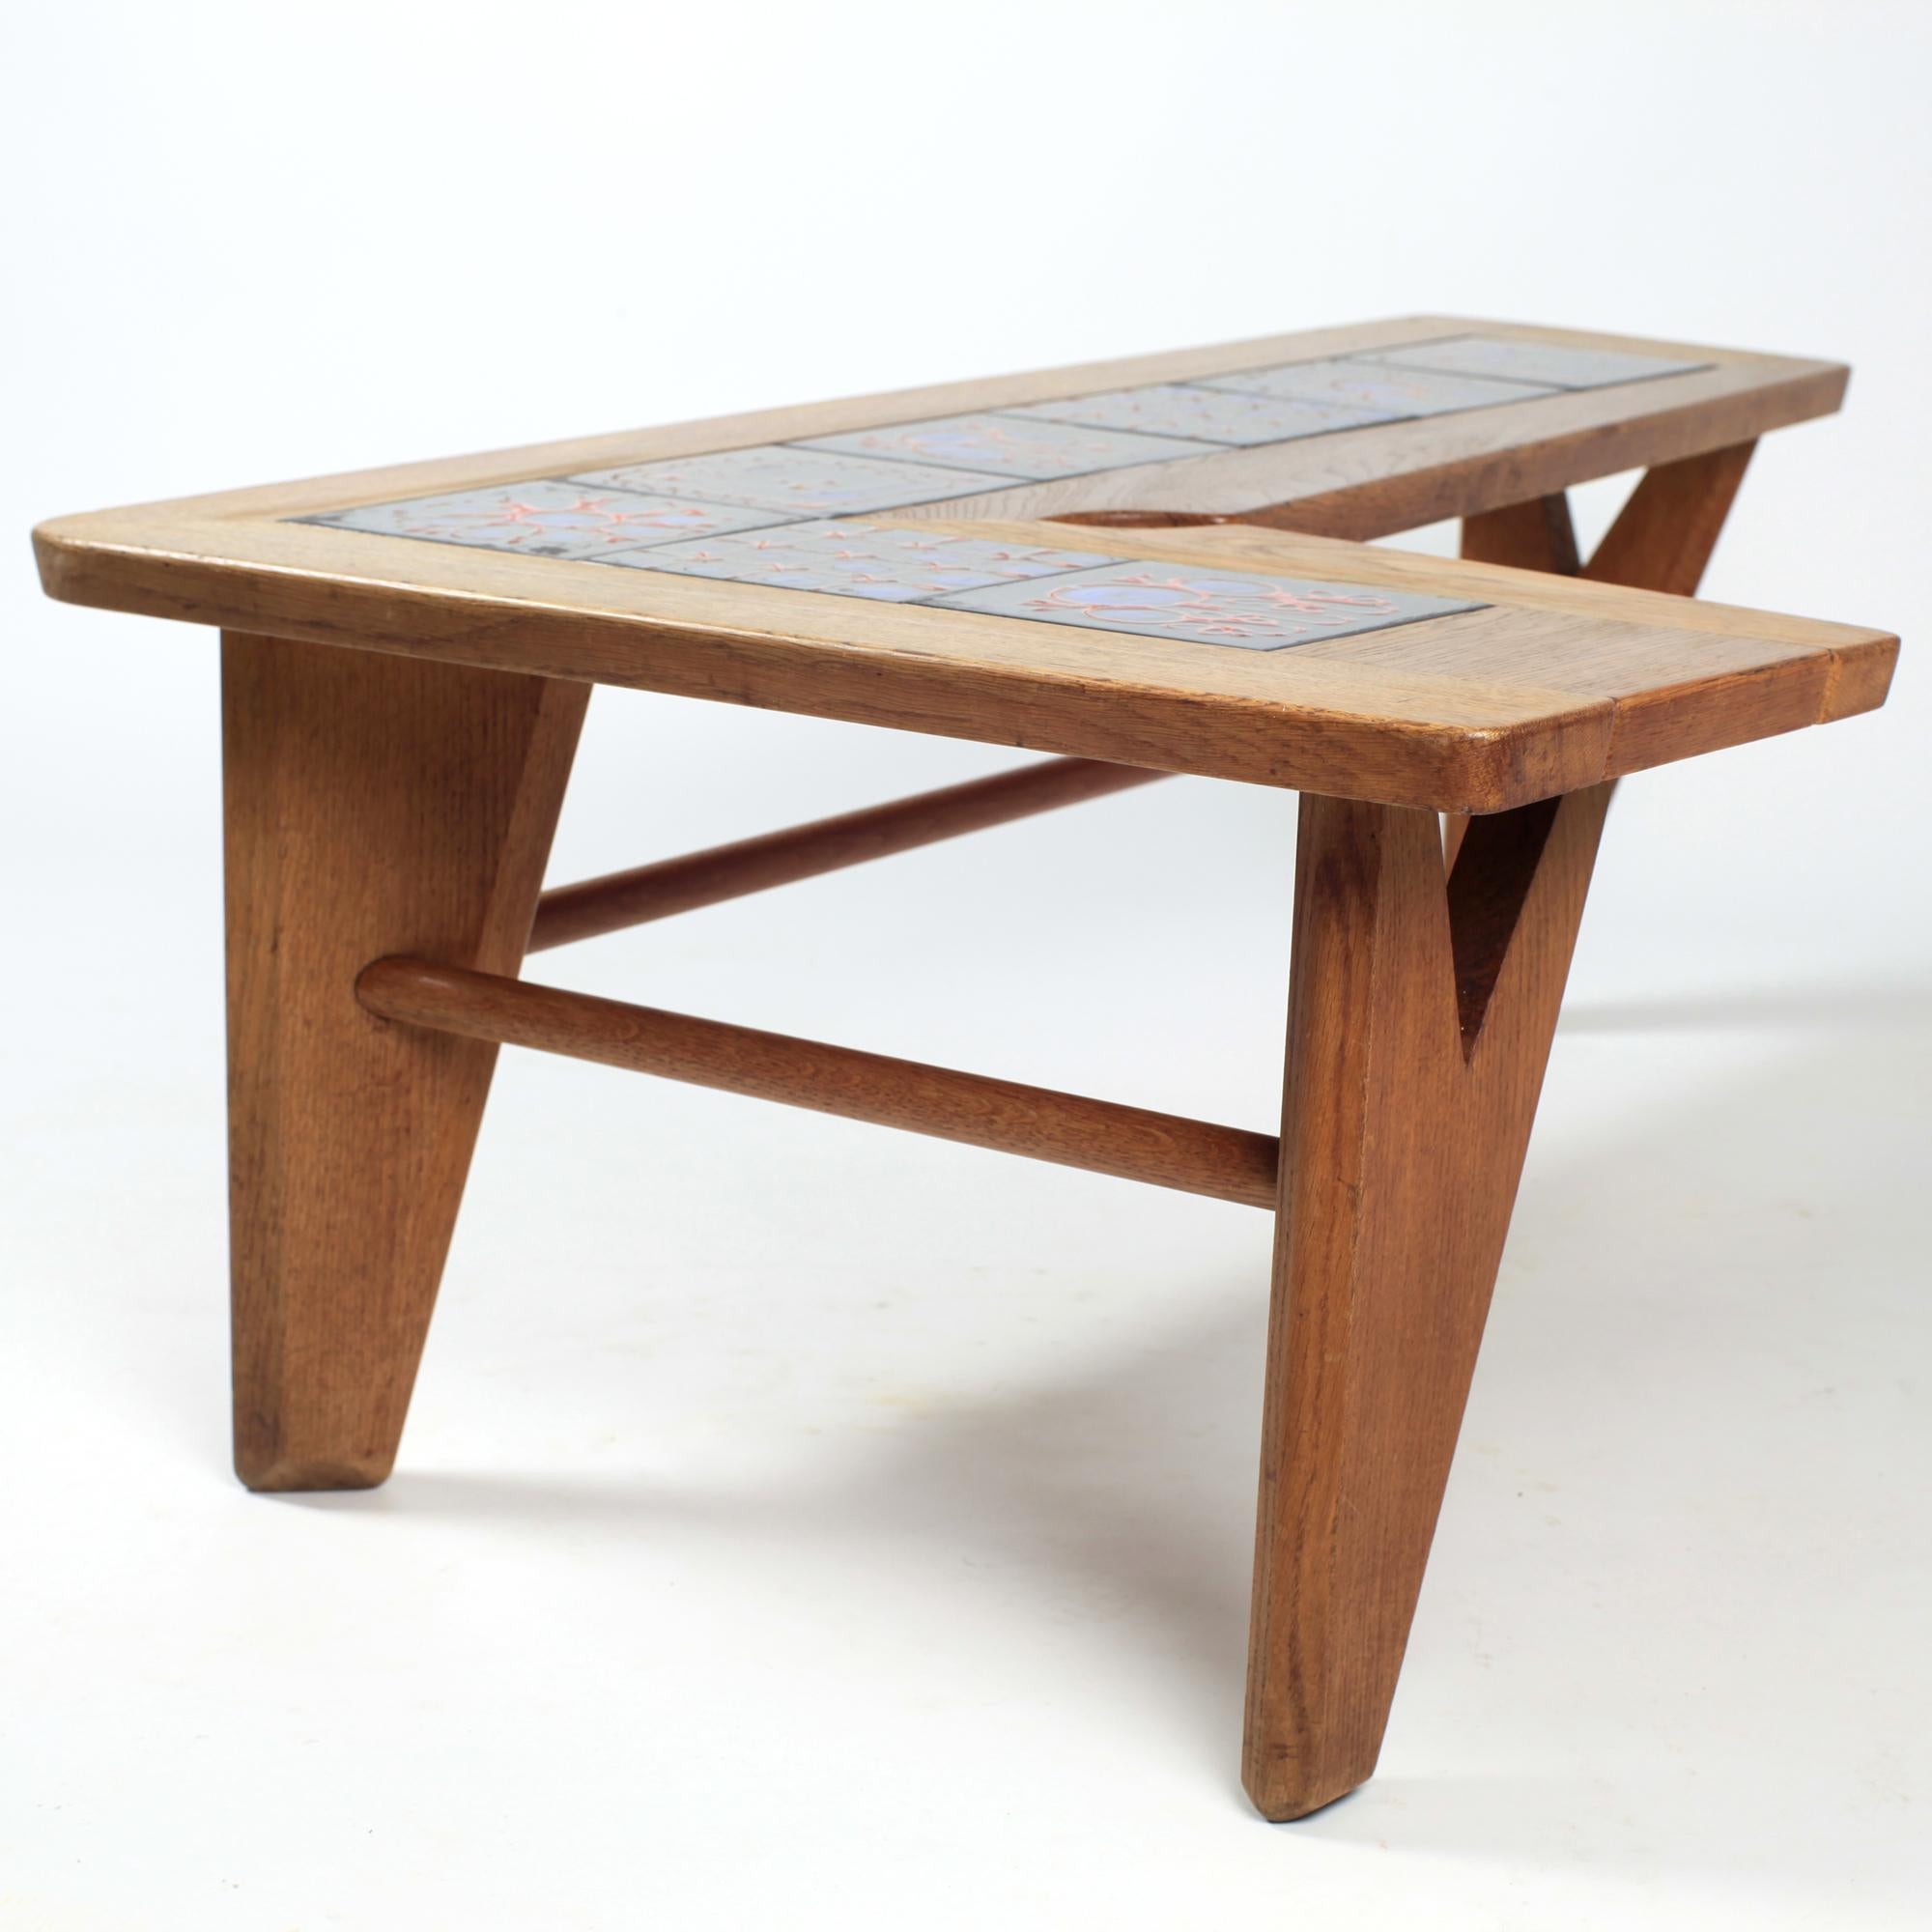 Guillerme et Chambron Solid Oak and Ceramics Coffee Table France circa 1965 For Sale 3